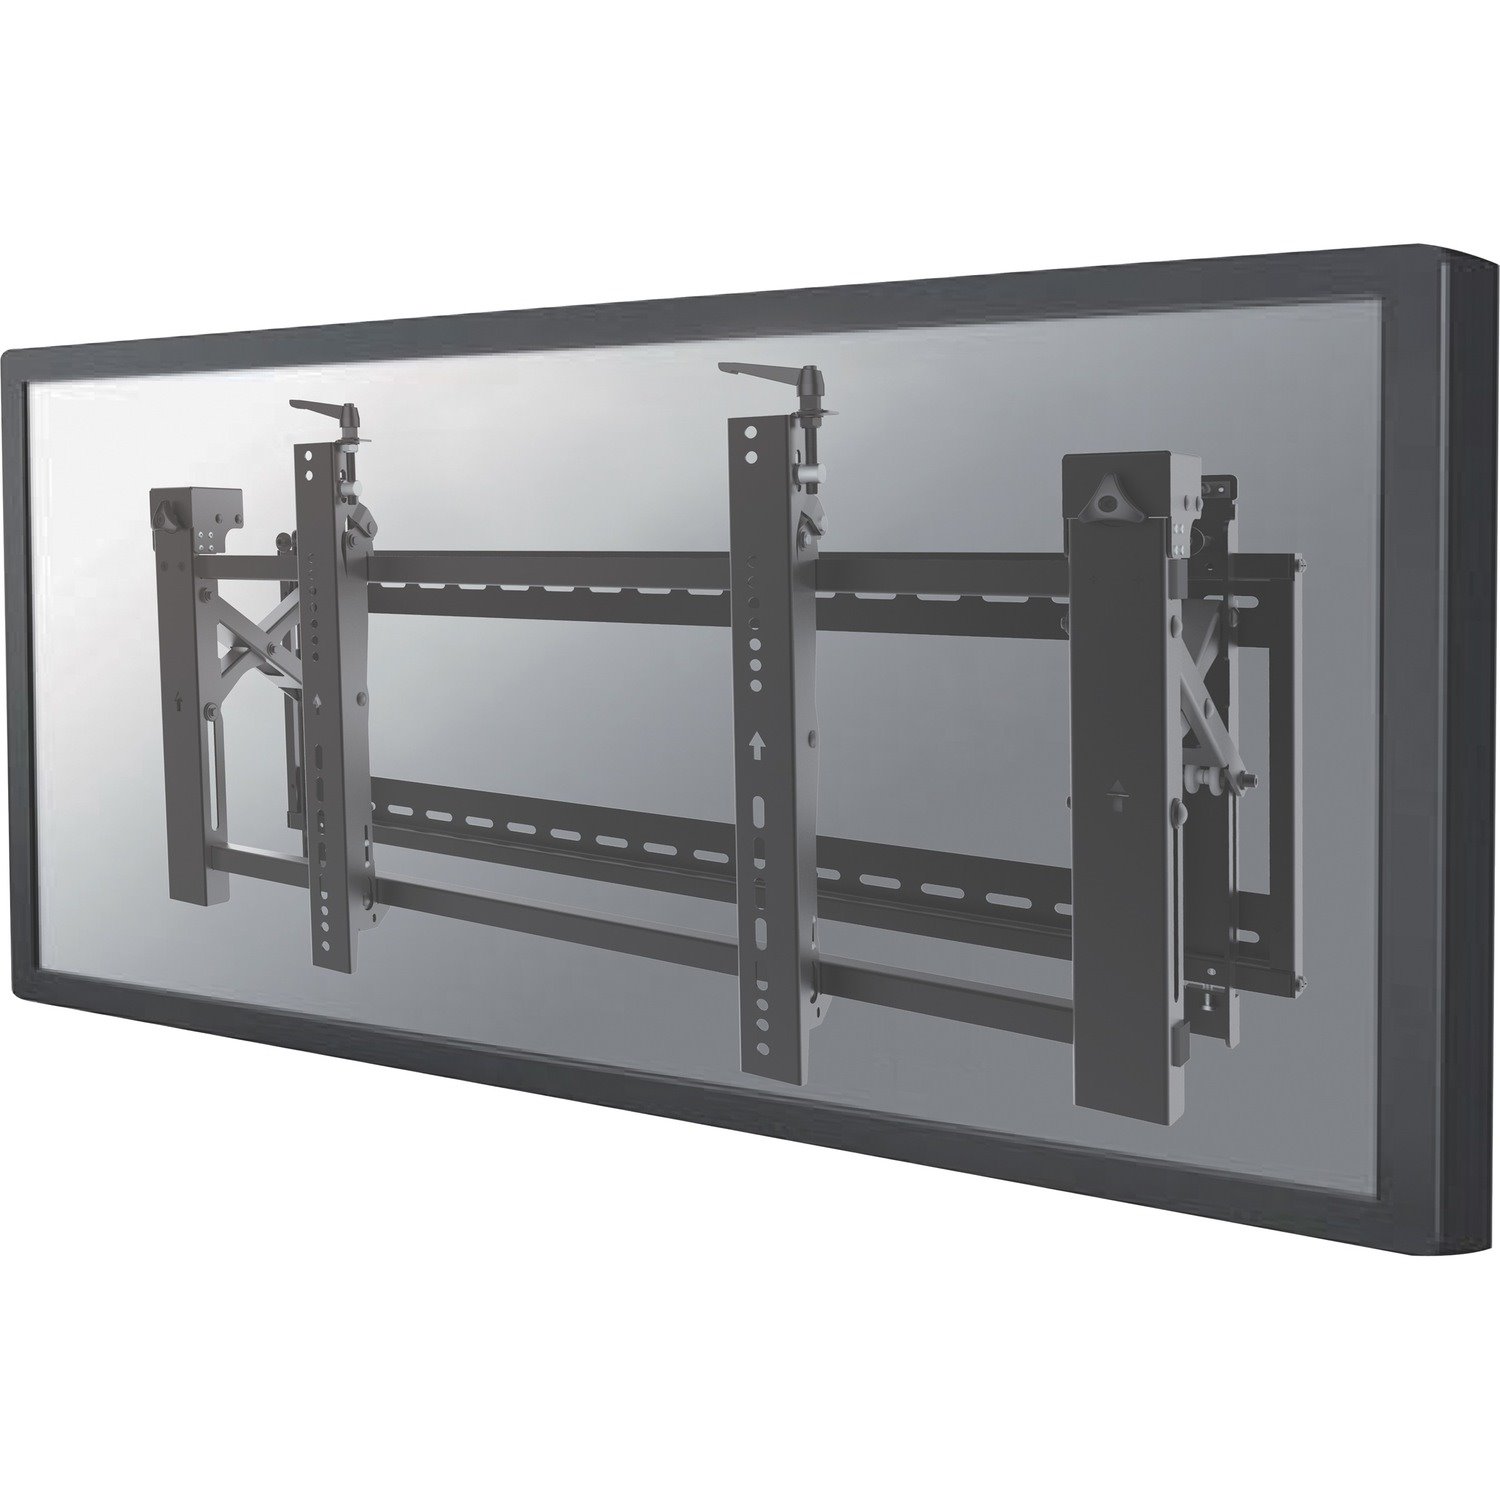 Newstar Video Wall Monitor Wall Mount for 32"-75" Screen - Black